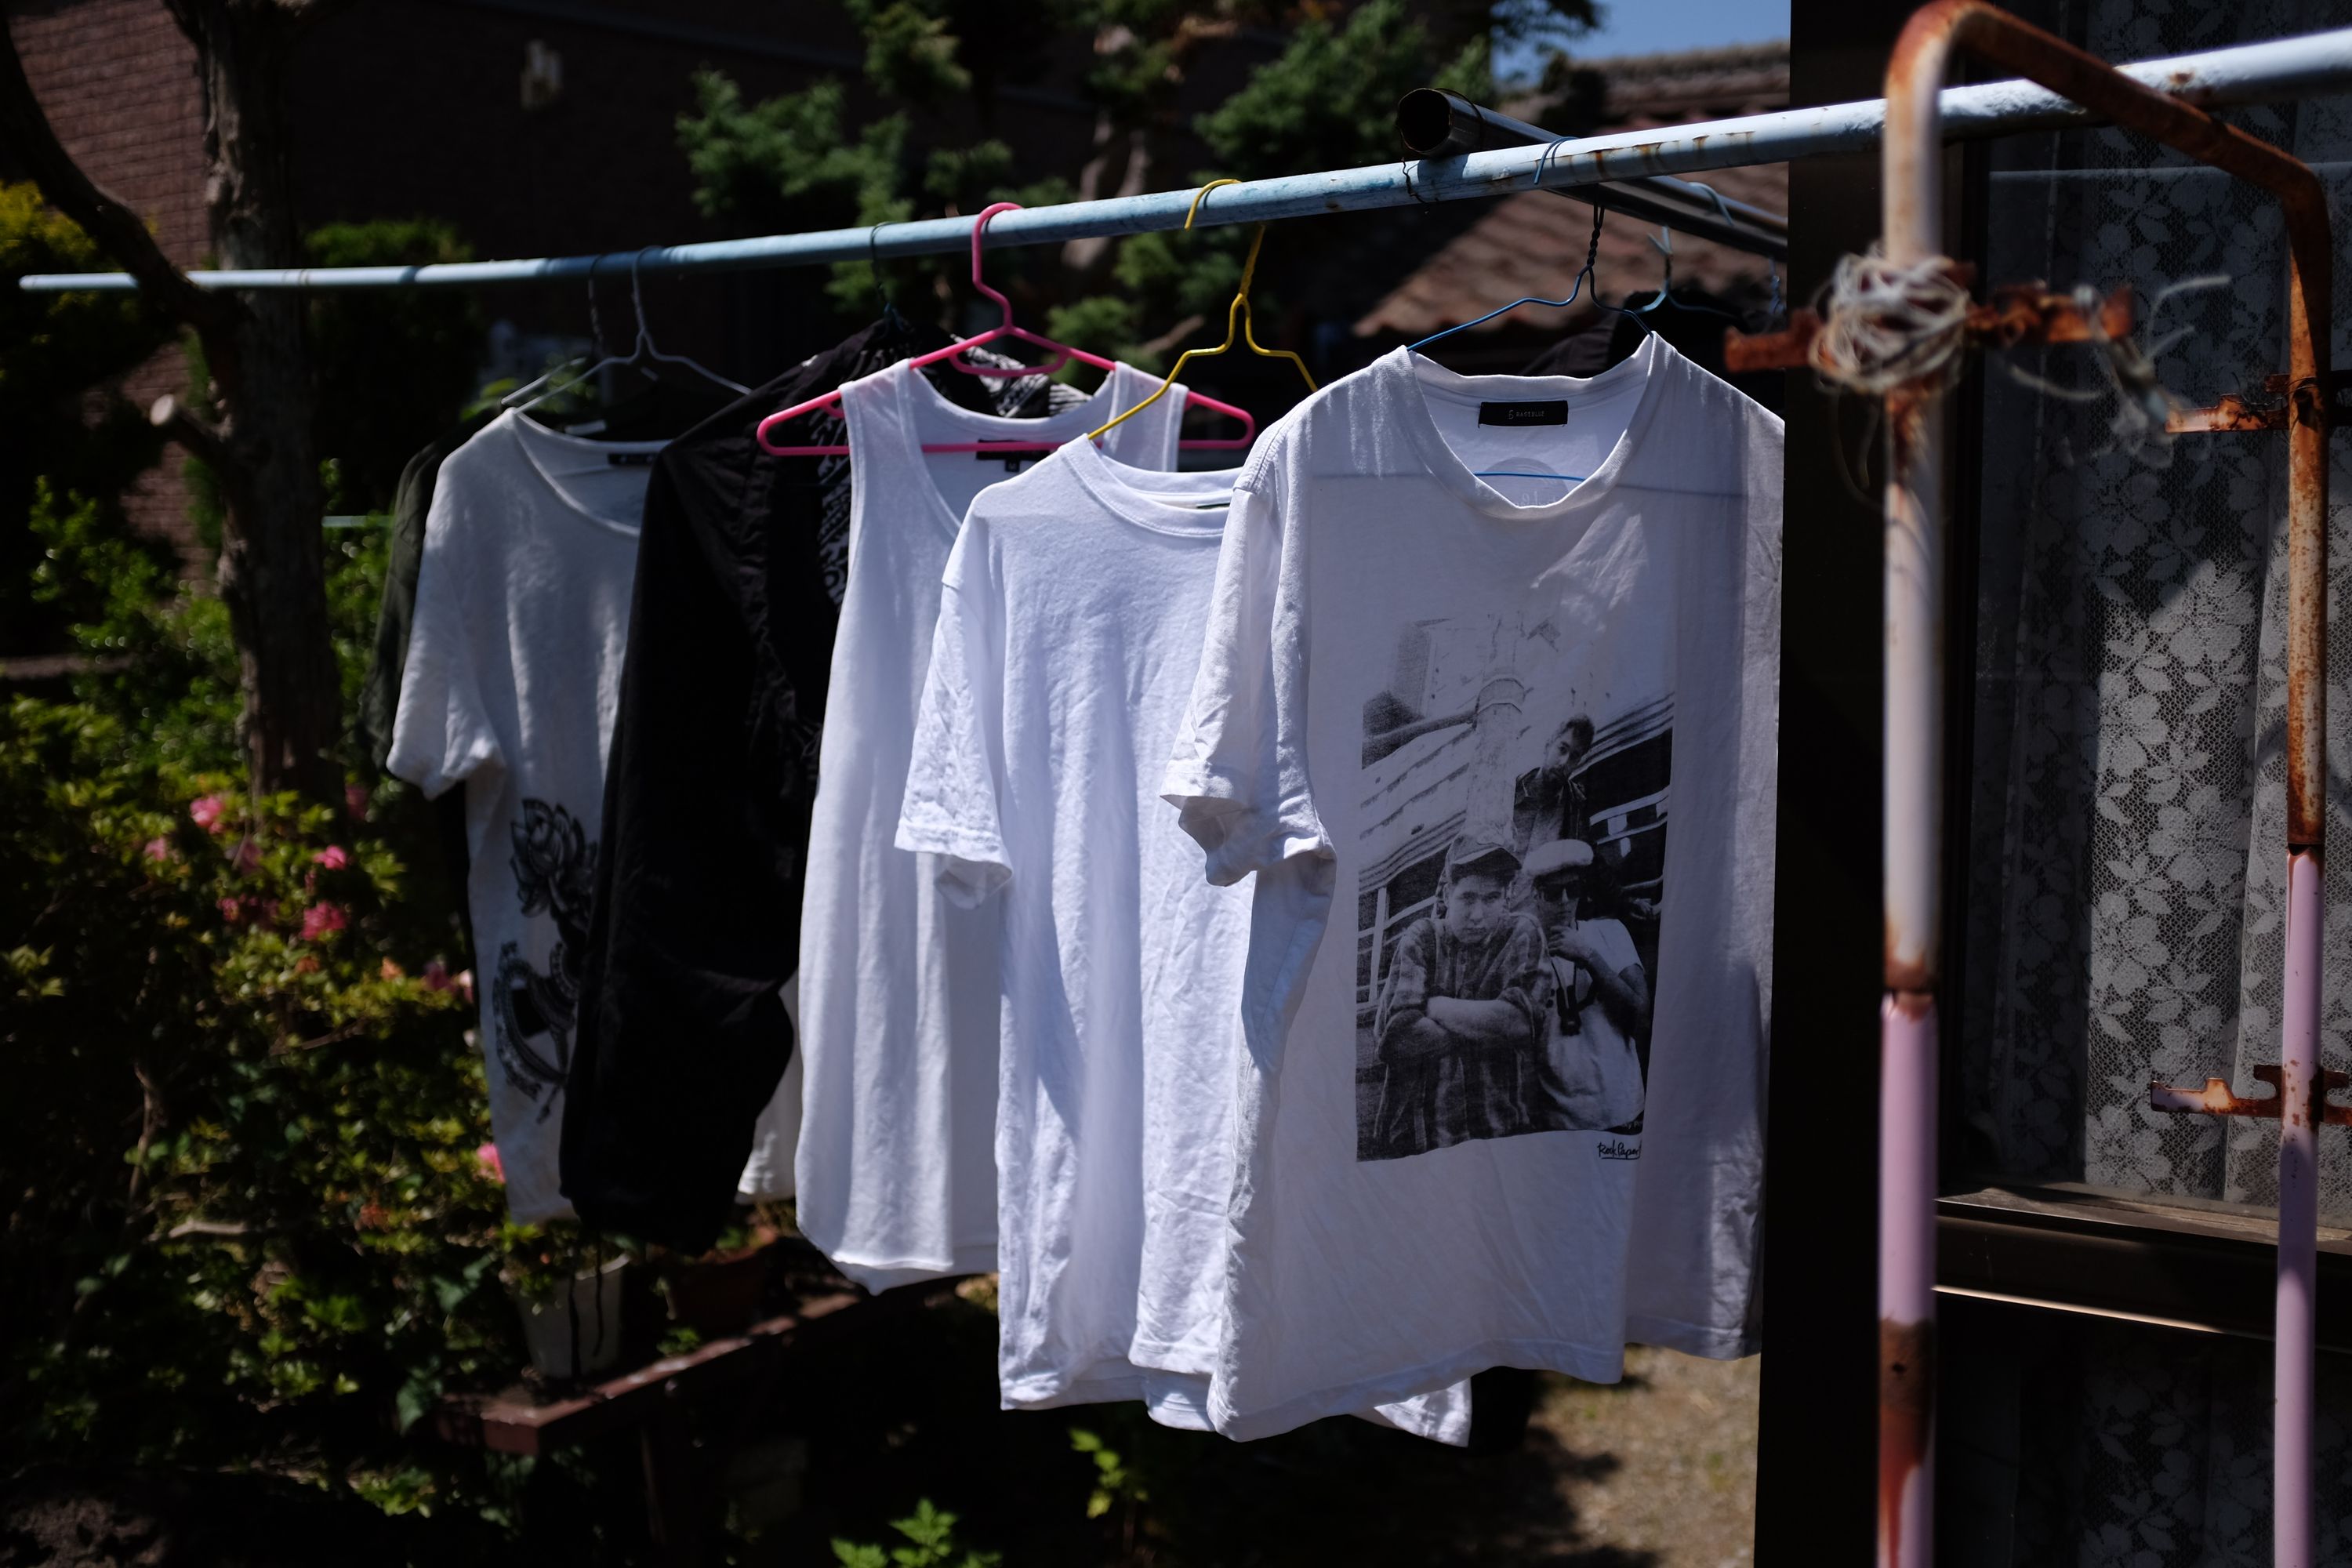 T-shirts drying on a pole.